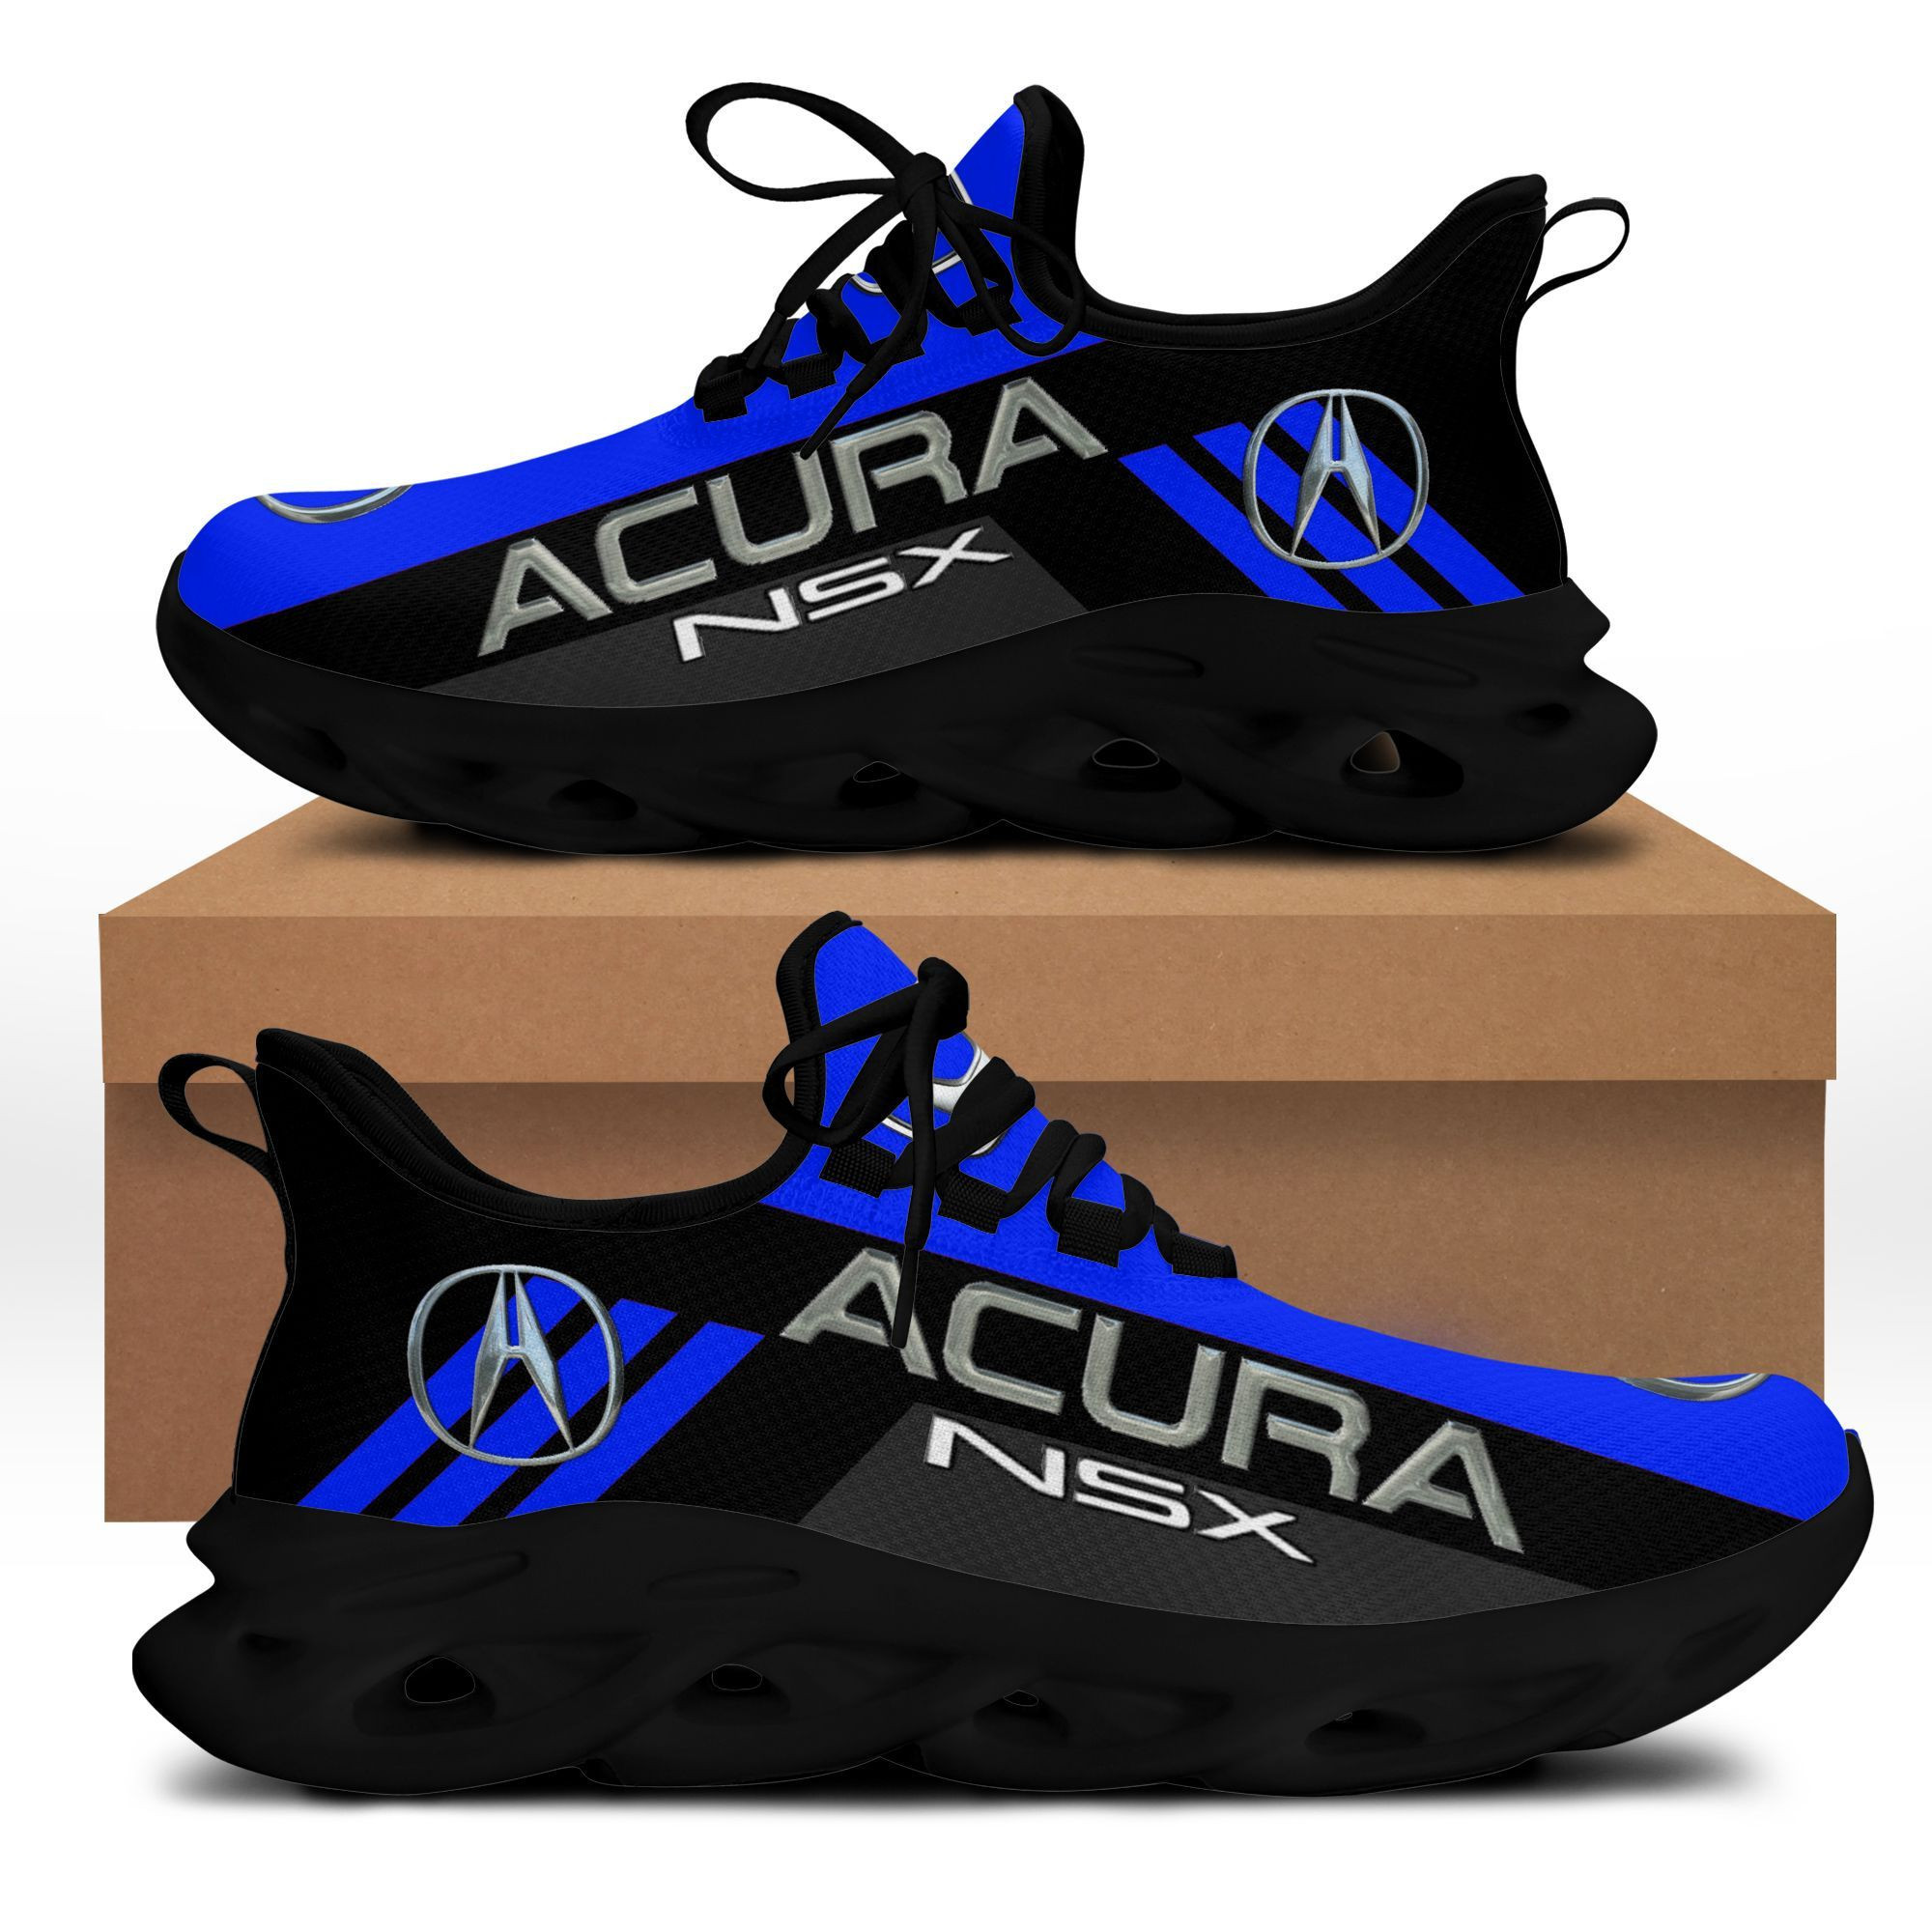 Acura Nsx Bs Running Shoes Ver 2 (Blue)